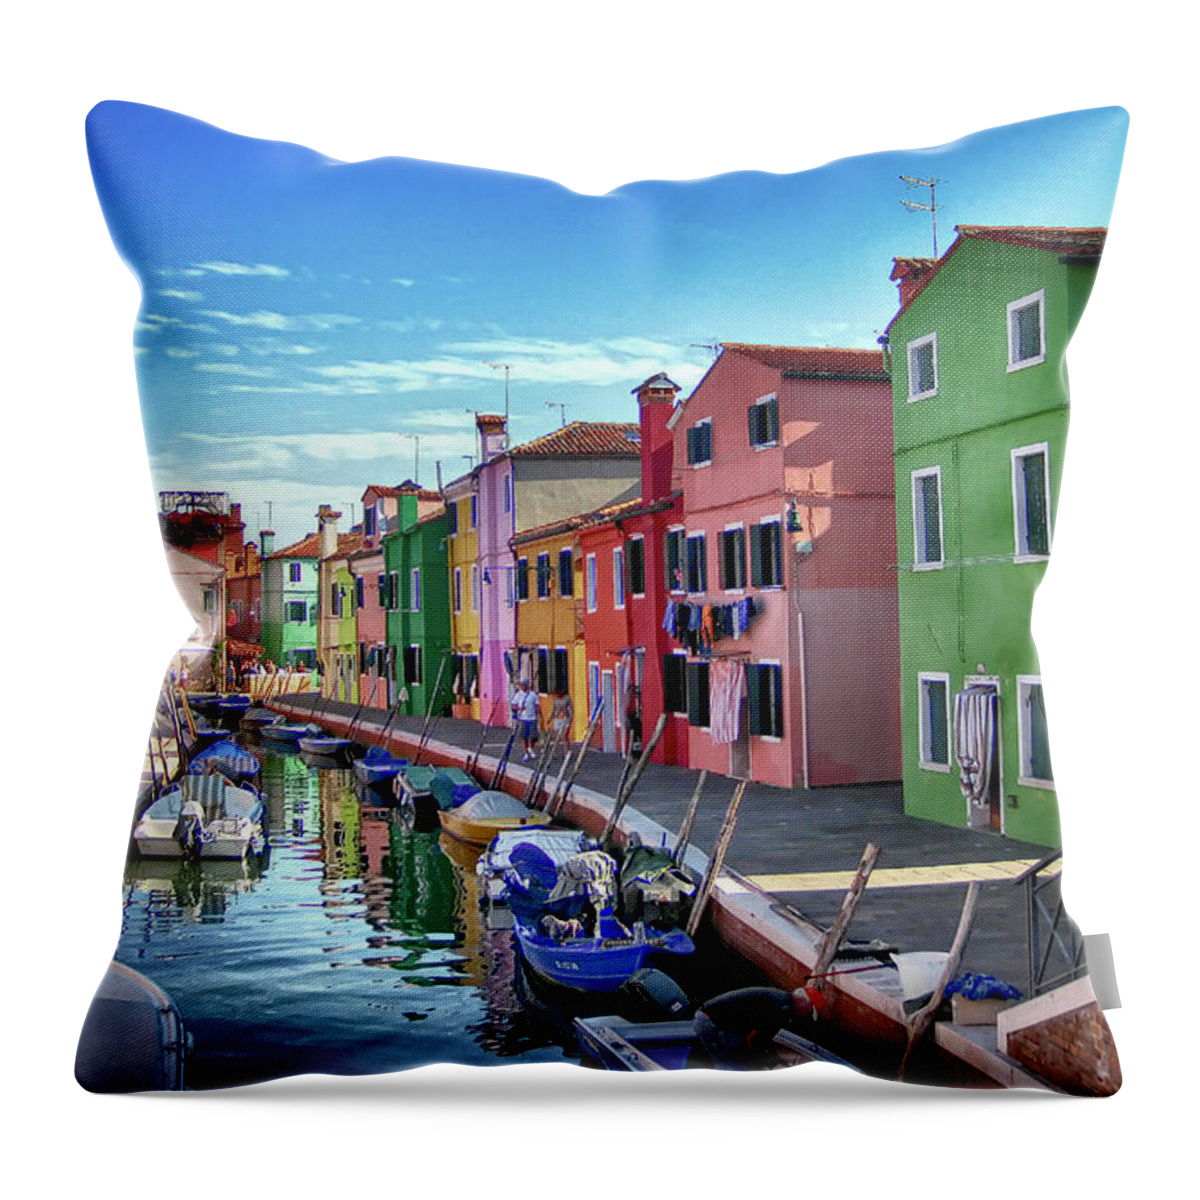 Tranquility Throw Pillow featuring the photograph A Tour Of Burano by Diego Gutierrez